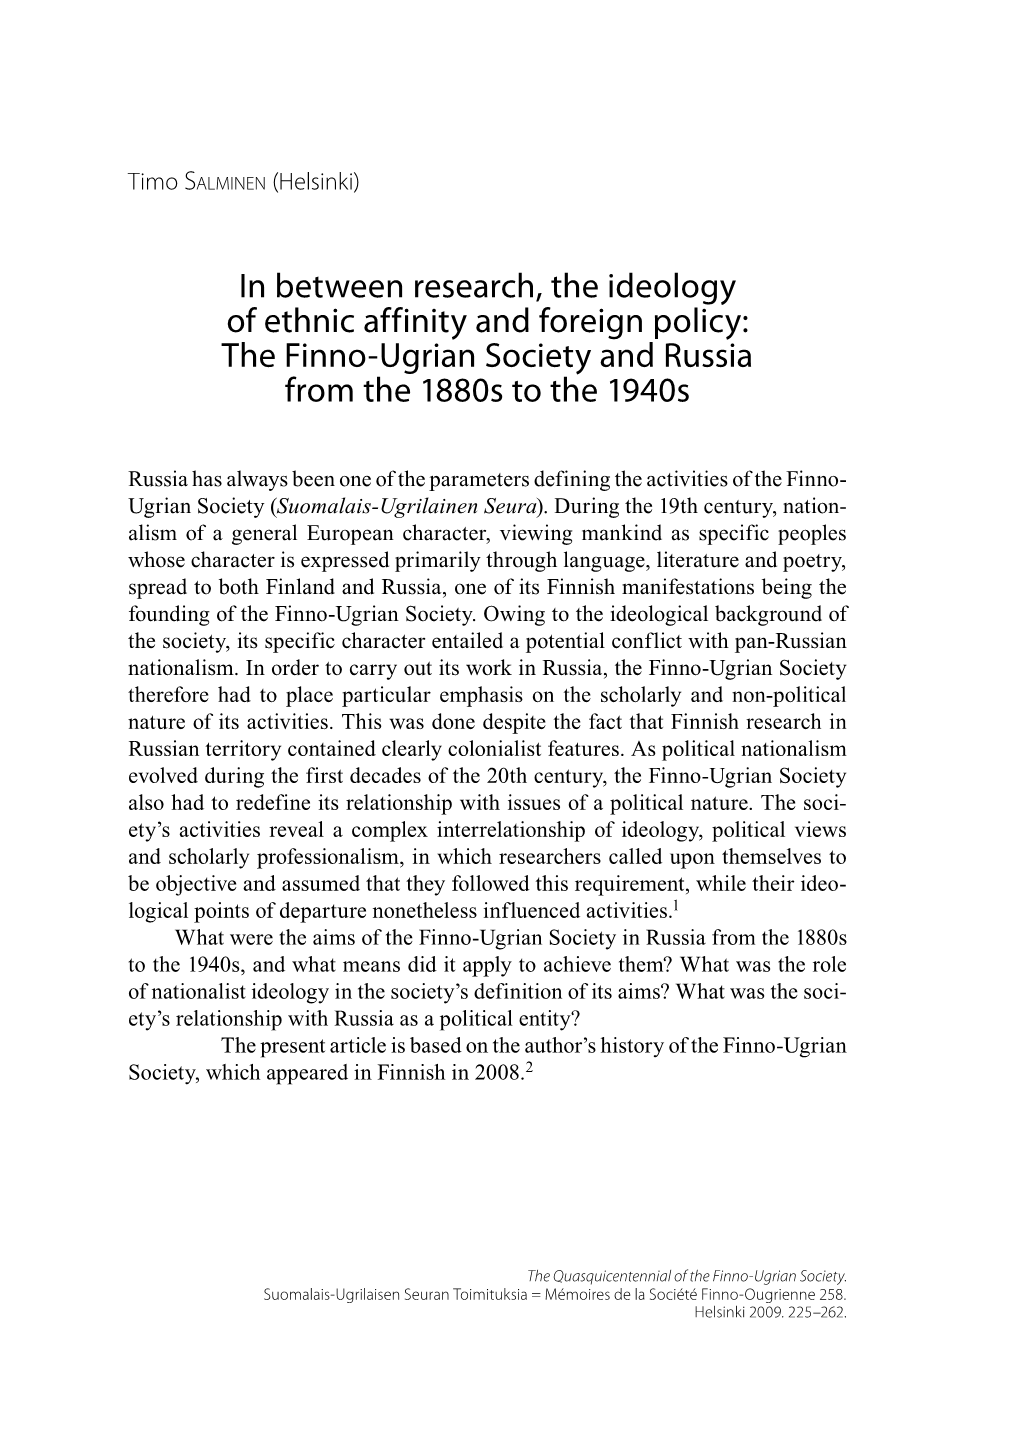 The Finno-Ugrian Society and Russia from the 1880S to the 1940S